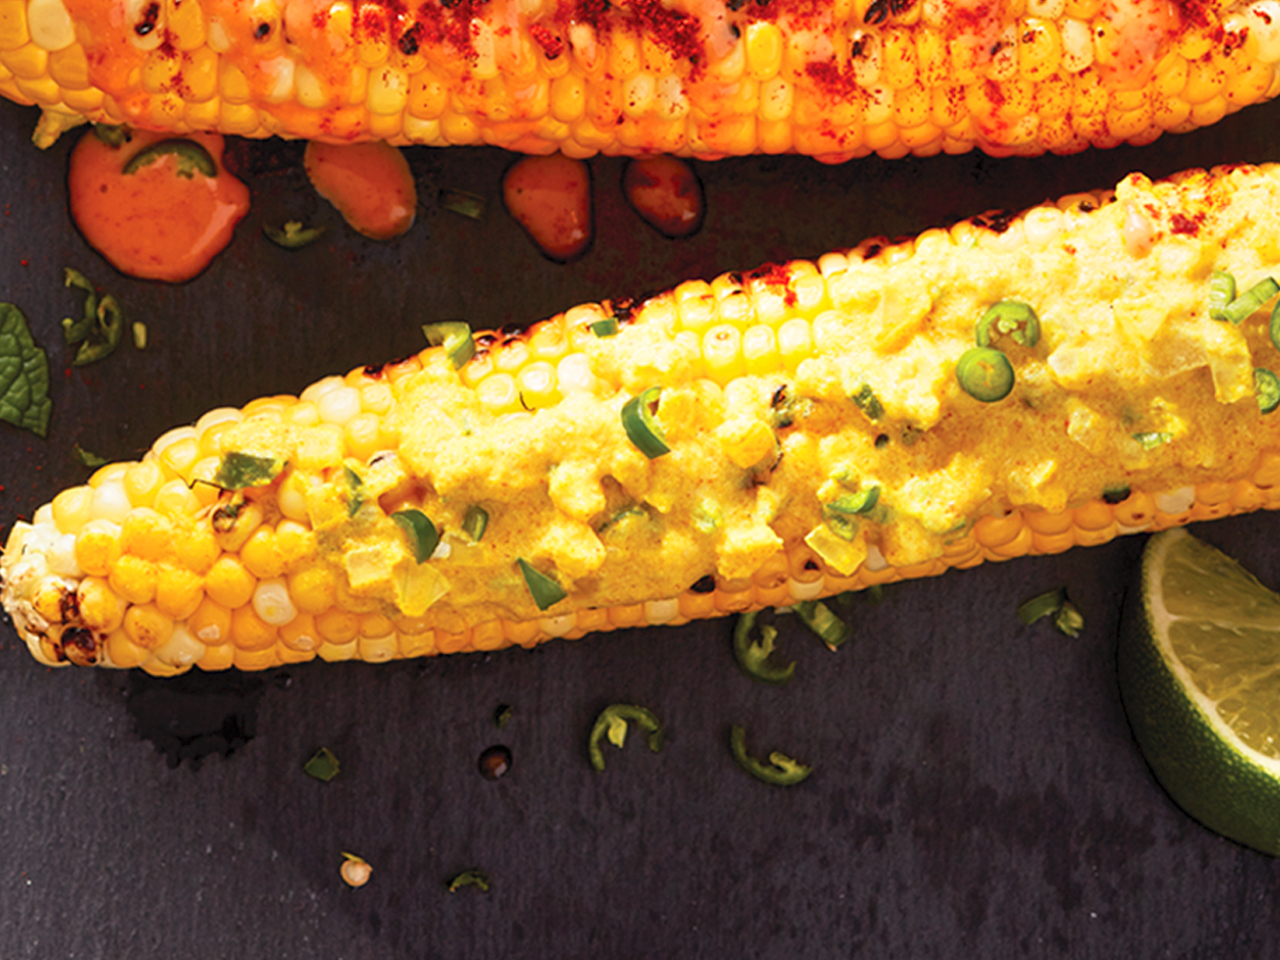 South Asian grilled corn